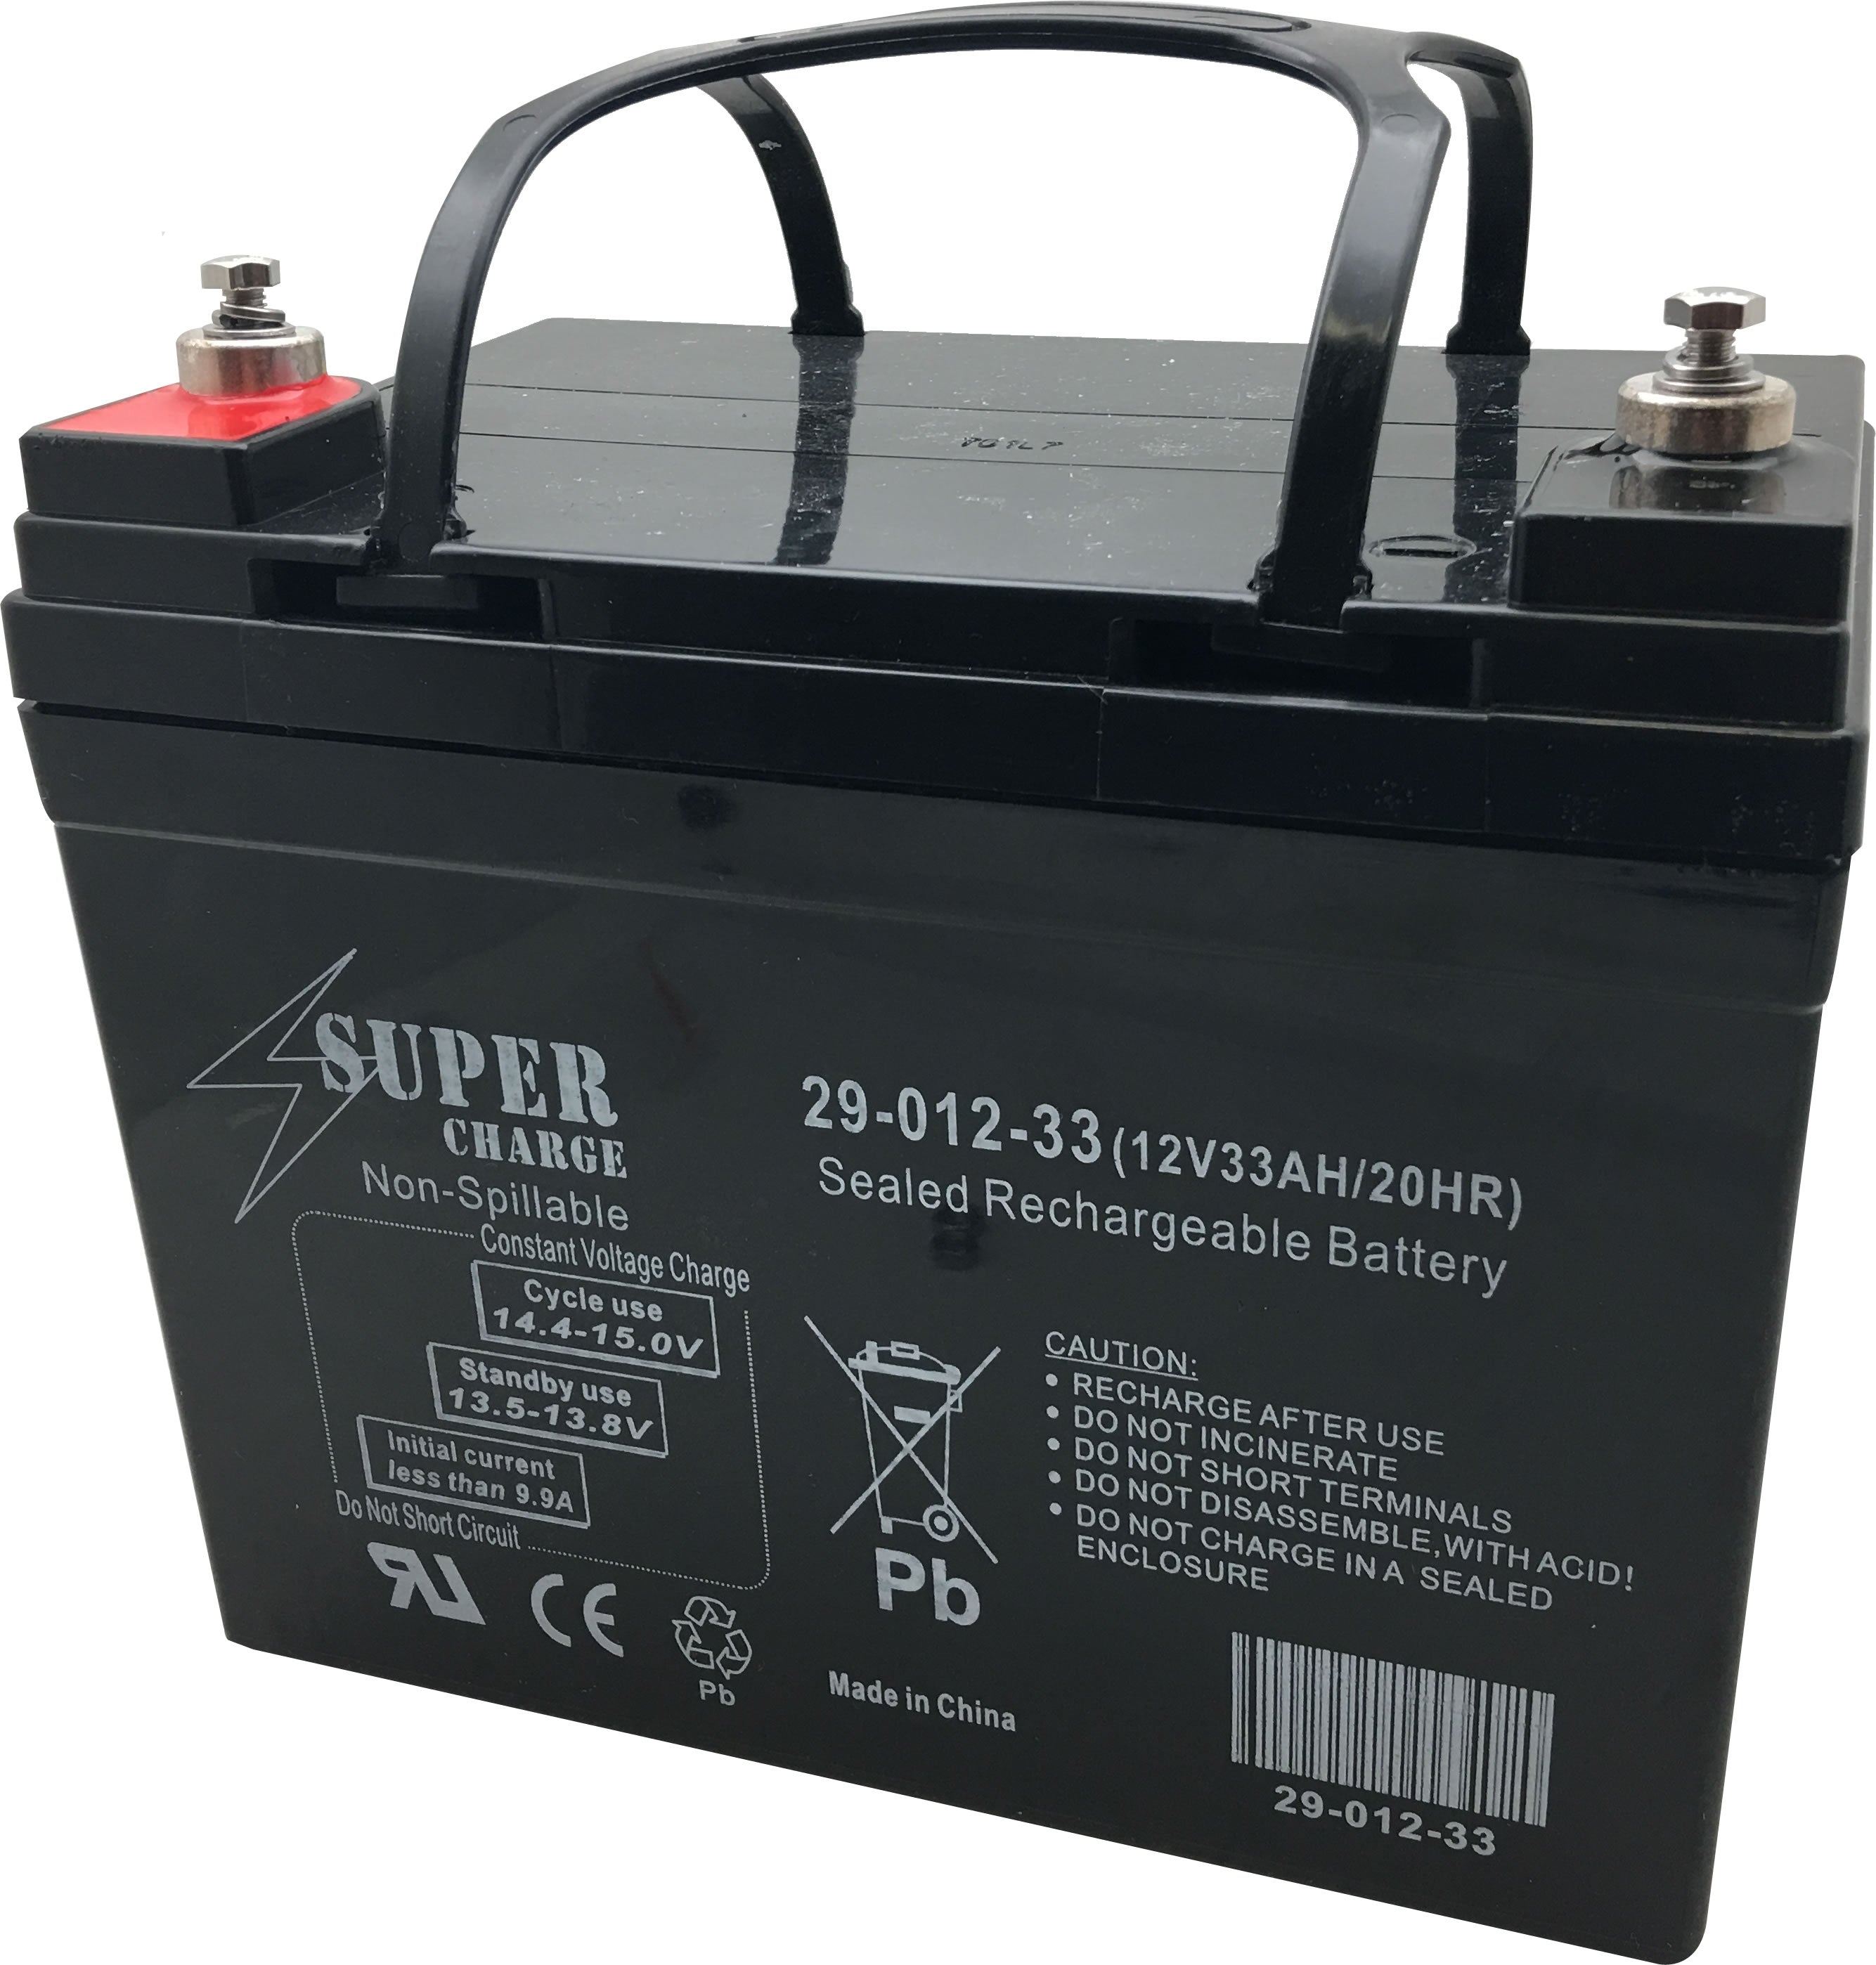 29-012-33 Rechargeable Battery 12V 33AH 20HR